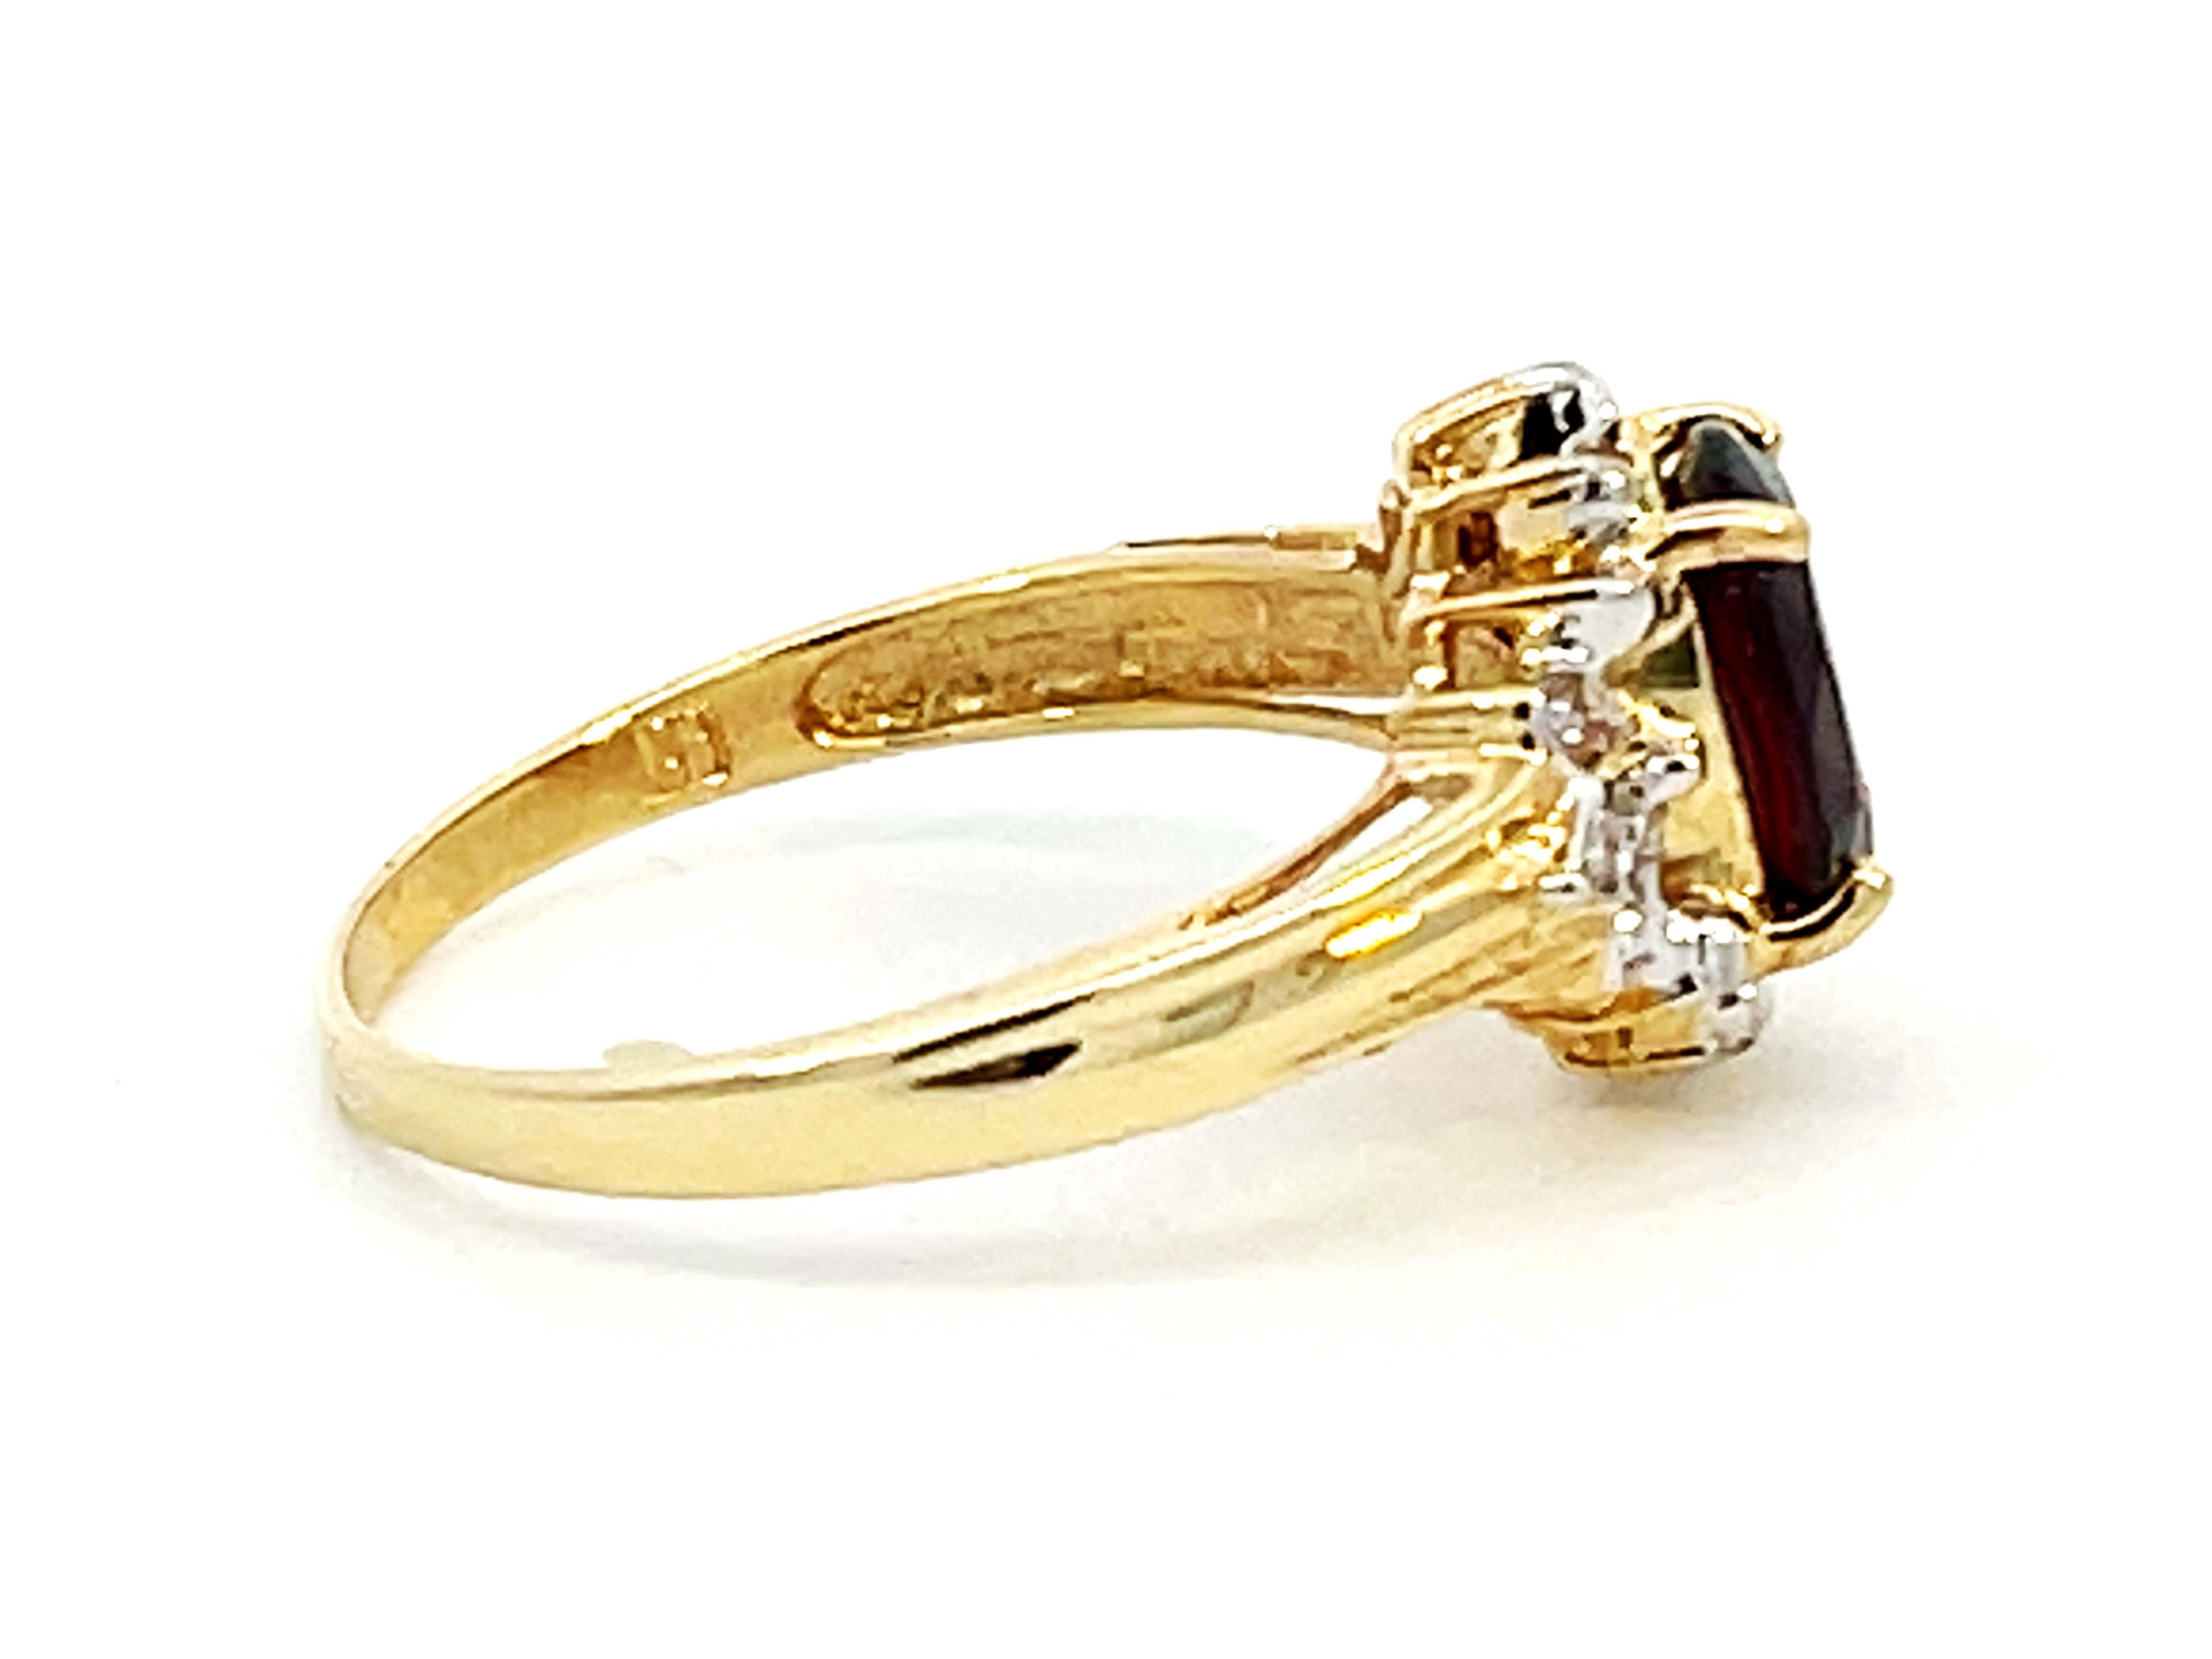 Deep Red Oval Garnet and Diamond Ring 14k Yellow Gold In Excellent Condition For Sale In Honolulu, HI